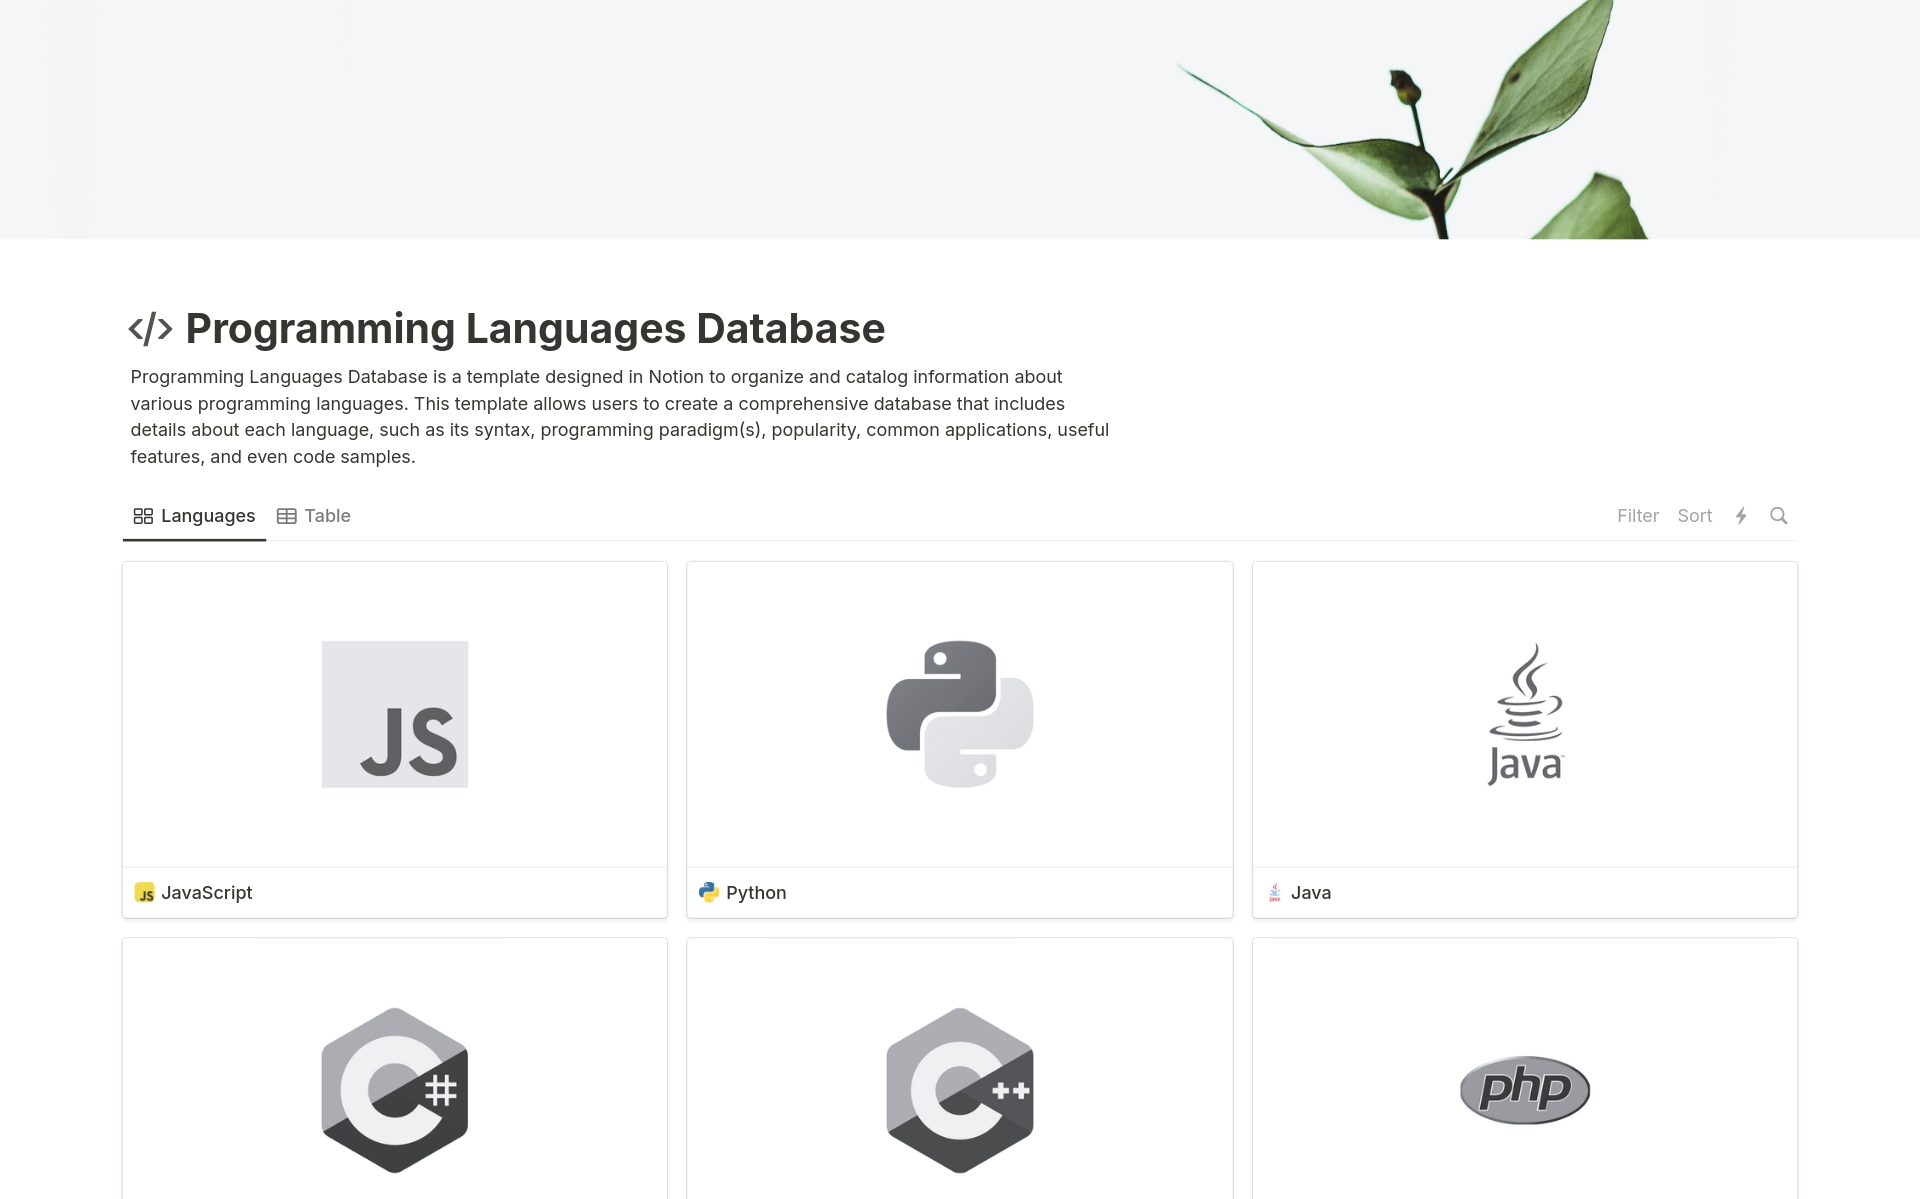 The Programming Languages Database template in Notion is a tool for organizing information about programming languages, including details like syntax, paradigm, popularity, and code examples.